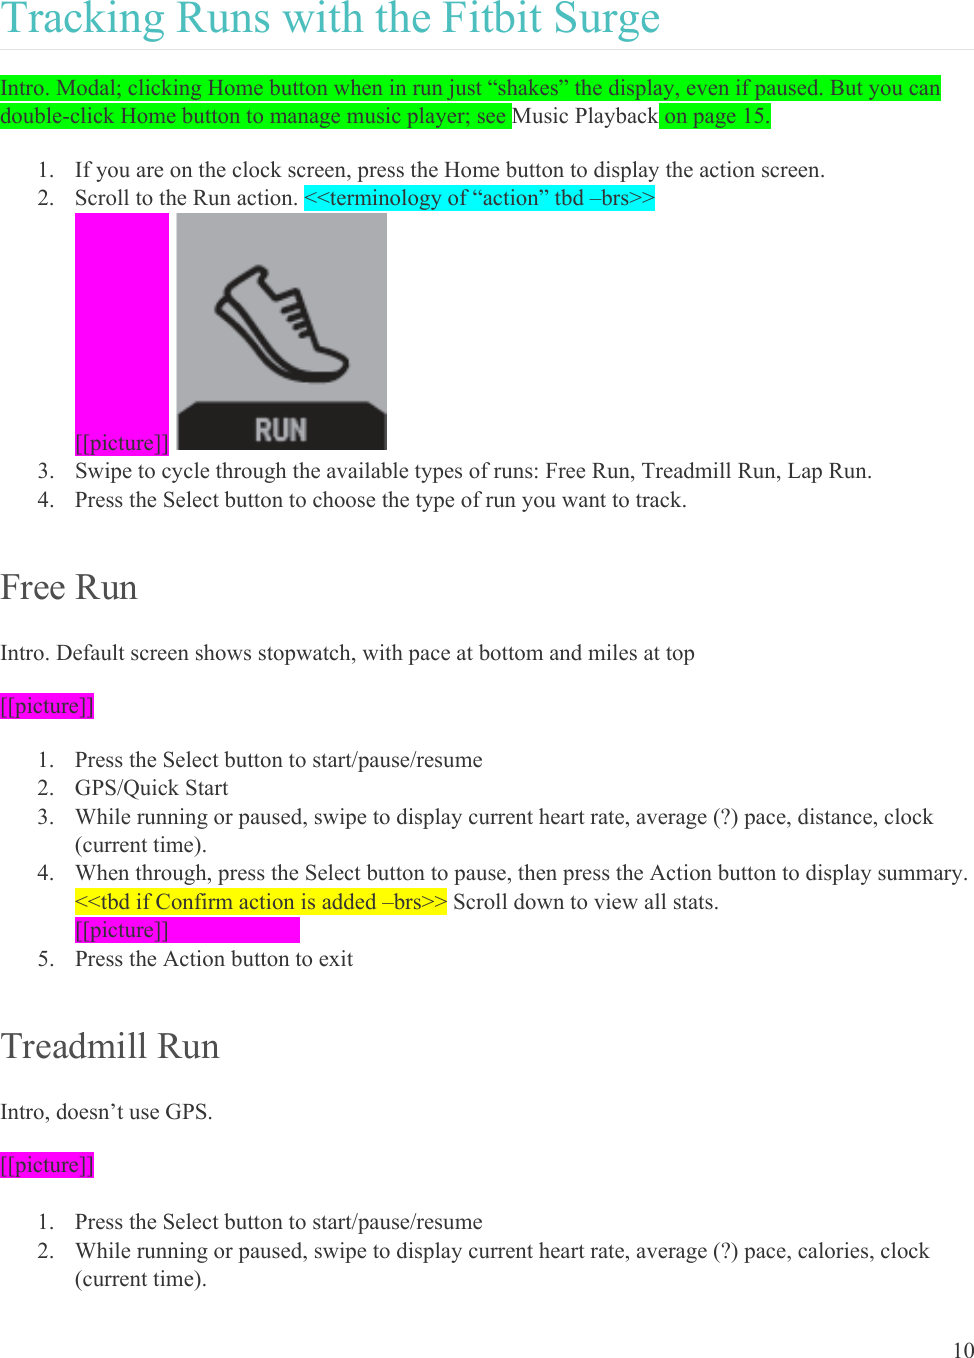 10  Tracking Runs with the Fitbit Surge Intro. Modal; clicking Home button when in run just “shakes” the display, even if paused. But you can double-click Home button to manage music player; see Music Playback on page 15. 1. If you are on the clock screen, press the Home button to display the action screen.  2. Scroll to the Run action. &lt;&lt;terminology of “action” tbd –brs&gt;&gt; [[picture]]  3. Swipe to cycle through the available types of runs: Free Run, Treadmill Run, Lap Run. 4. Press the Select button to choose the type of run you want to track. Free Run Intro. Default screen shows stopwatch, with pace at bottom and miles at top [[picture]] 1. Press the Select button to start/pause/resume  2. GPS/Quick Start 3. While running or paused, swipe to display current heart rate, average (?) pace, distance, clock (current time). 4. When through, press the Select button to pause, then press the Action button to display summary. &lt;&lt;tbd if Confirm action is added –brs&gt;&gt; Scroll down to view all stats.  [[picture]]    5. Press the Action button to exit Treadmill Run Intro, doesn’t use GPS. [[picture]]  1. Press the Select button to start/pause/resume  2. While running or paused, swipe to display current heart rate, average (?) pace, calories, clock (current time). 